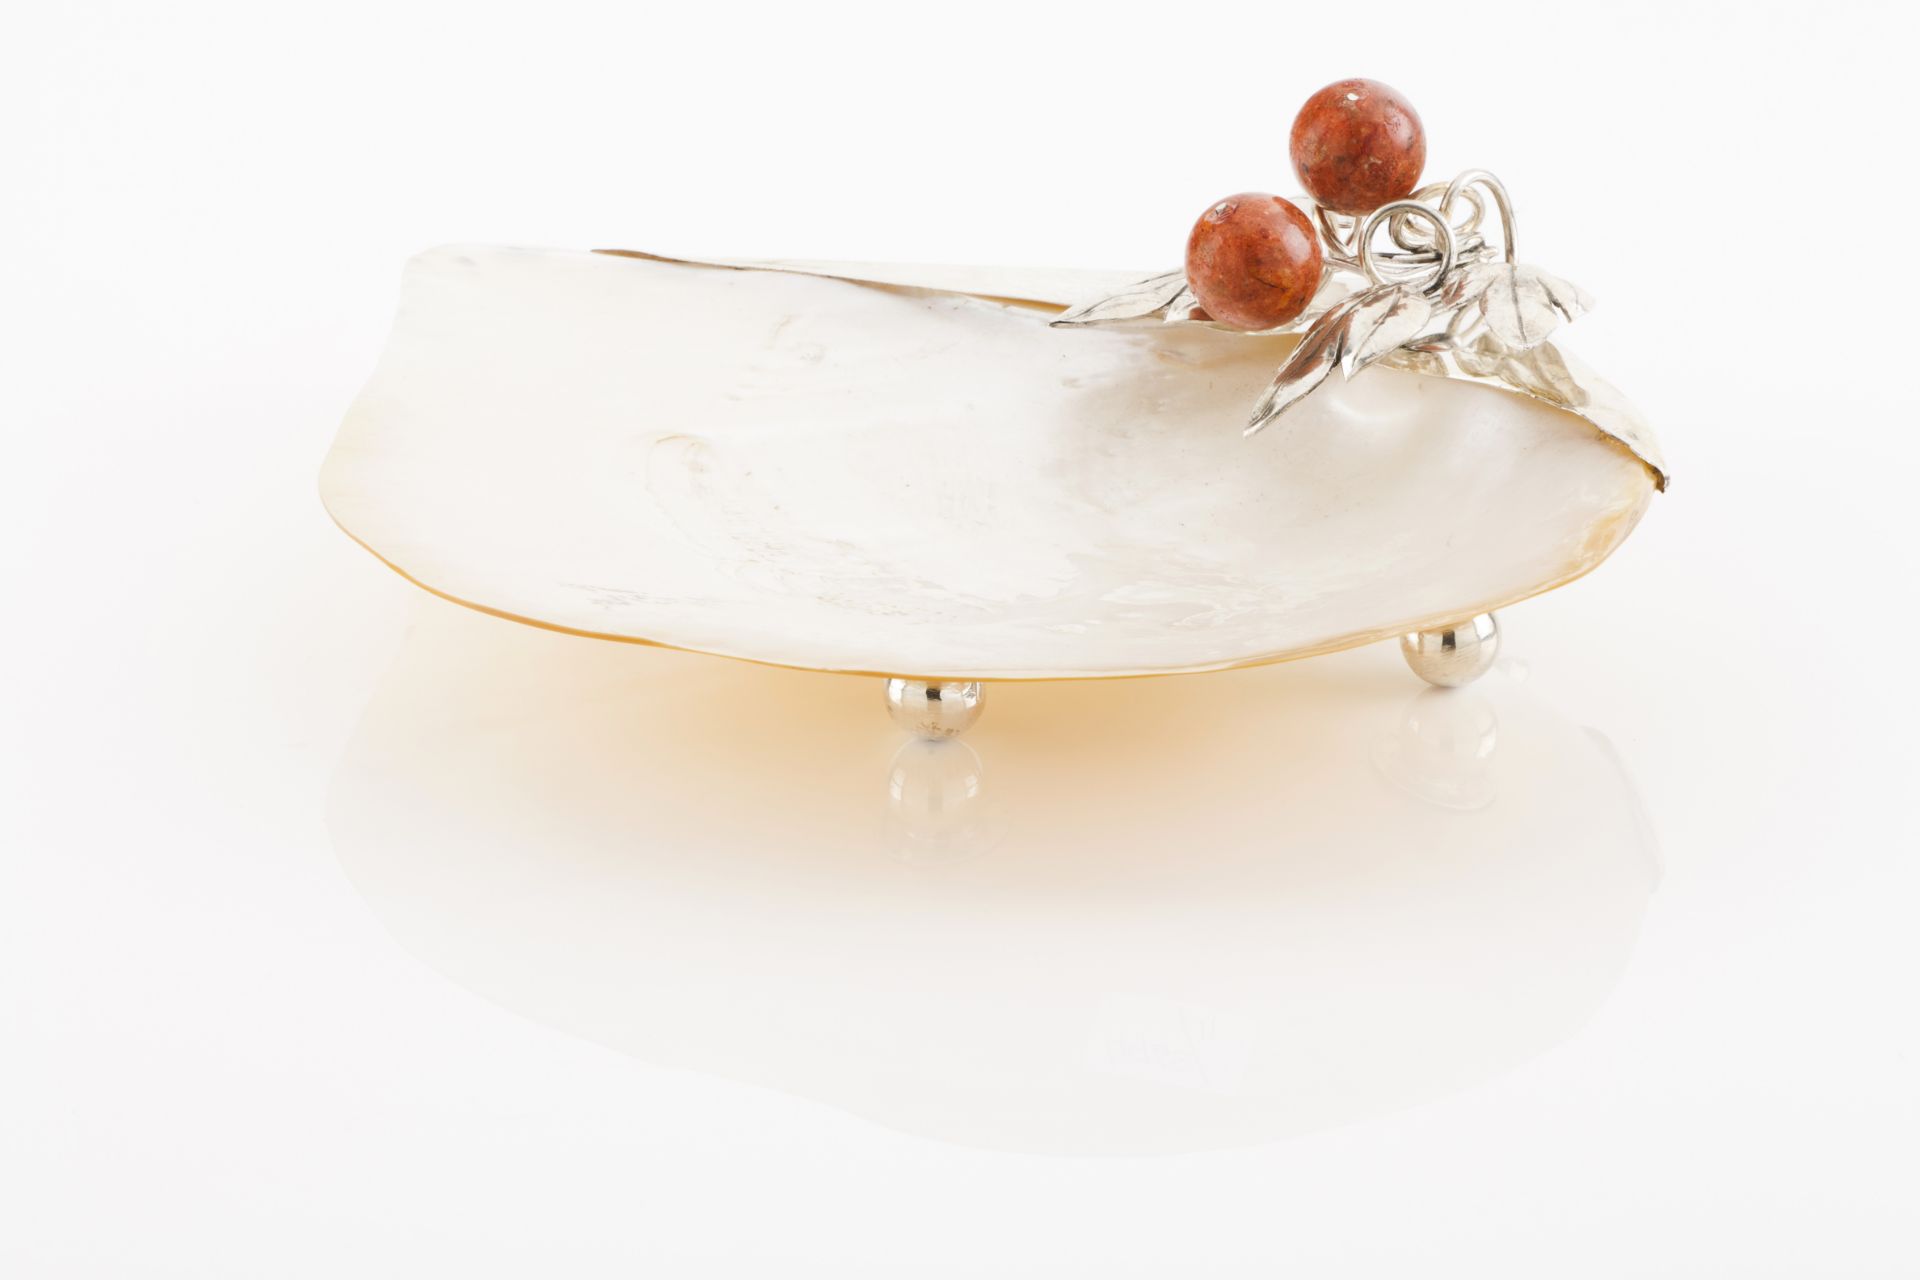 A bowlMother-of-pearl shellApplied silver leaves and hardstone fruitsOn 3 sphere feetLisbon